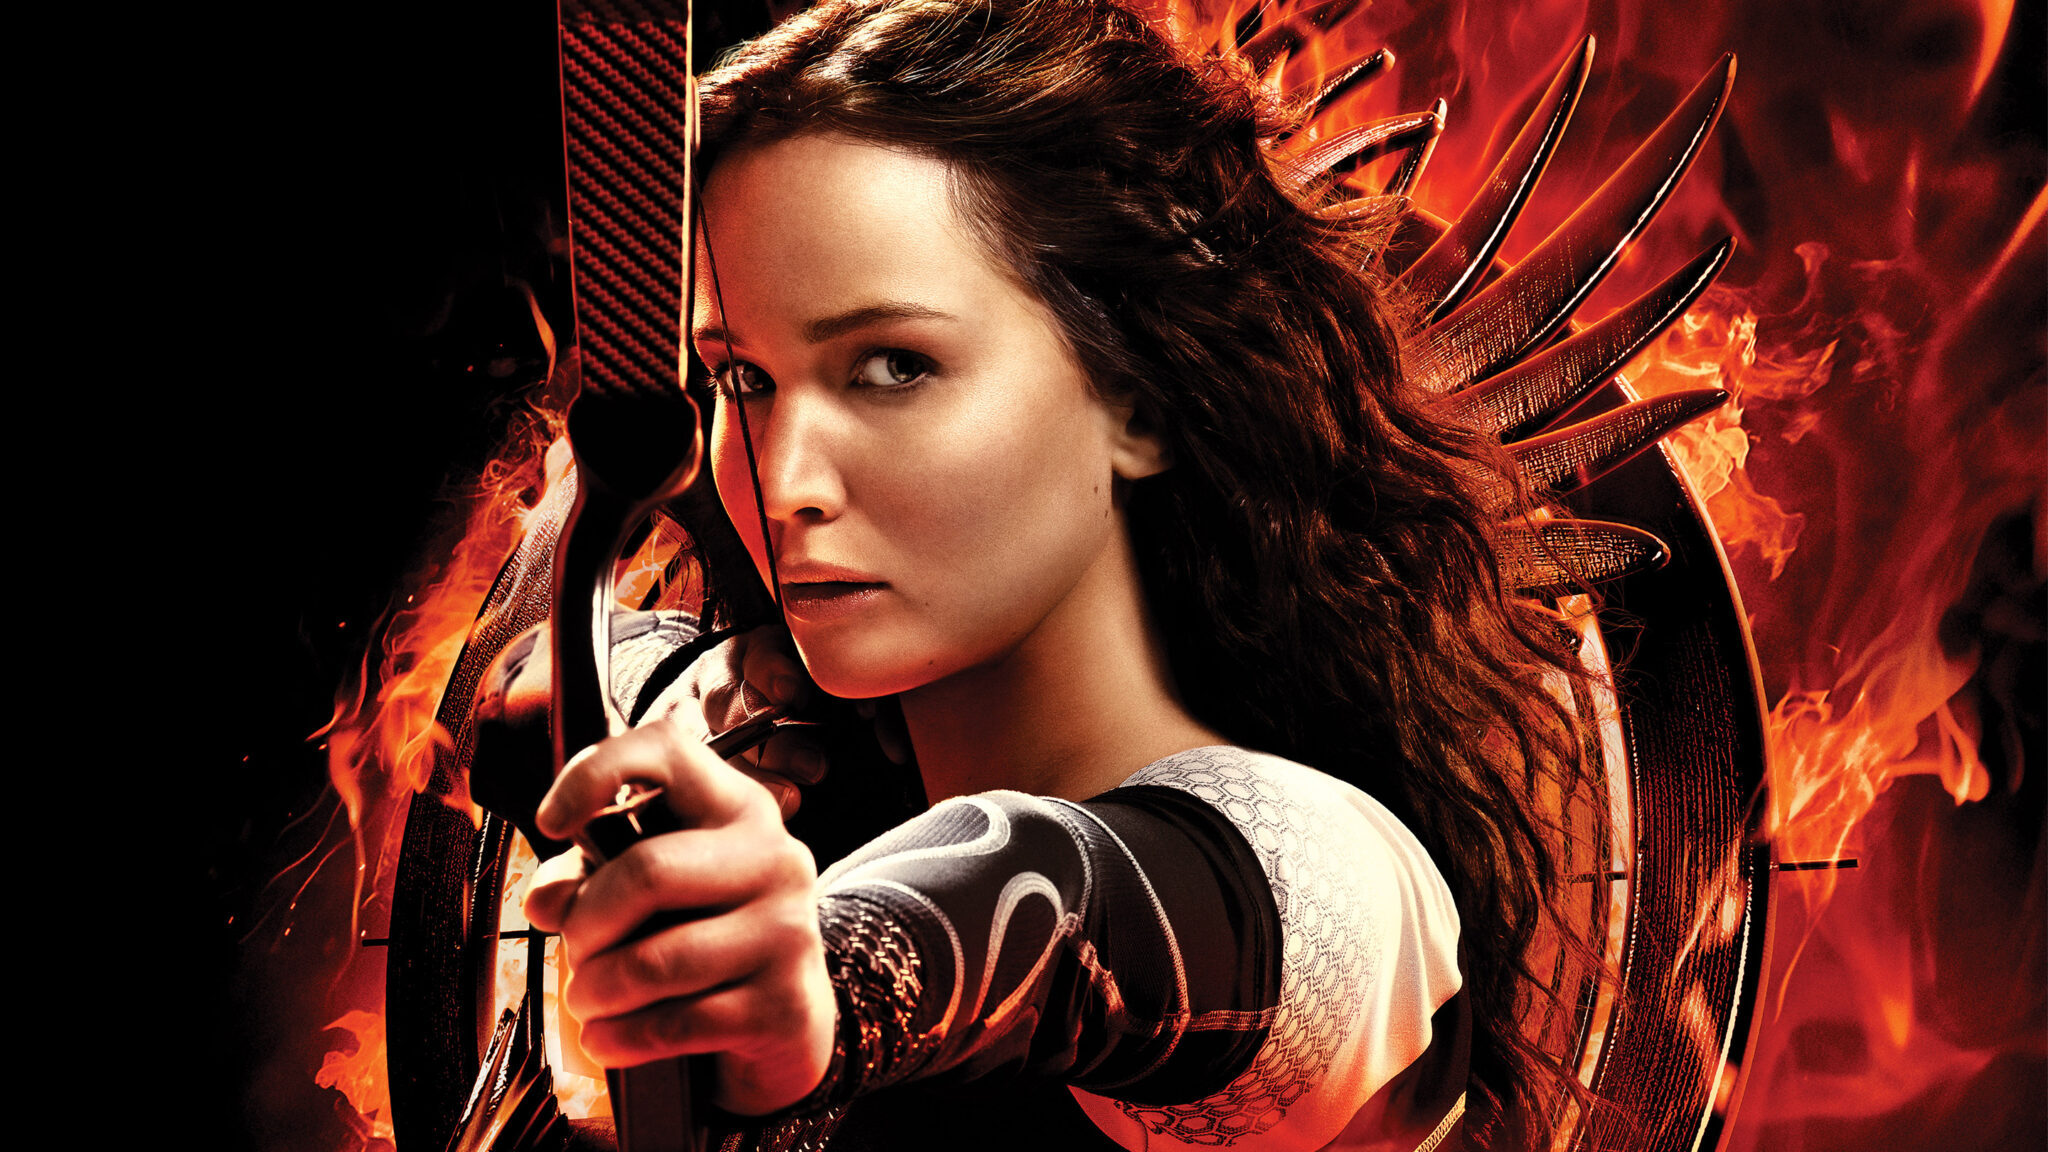 Exclusive New Hunger Games Movie Being Worked On, Jennifer Lawrence